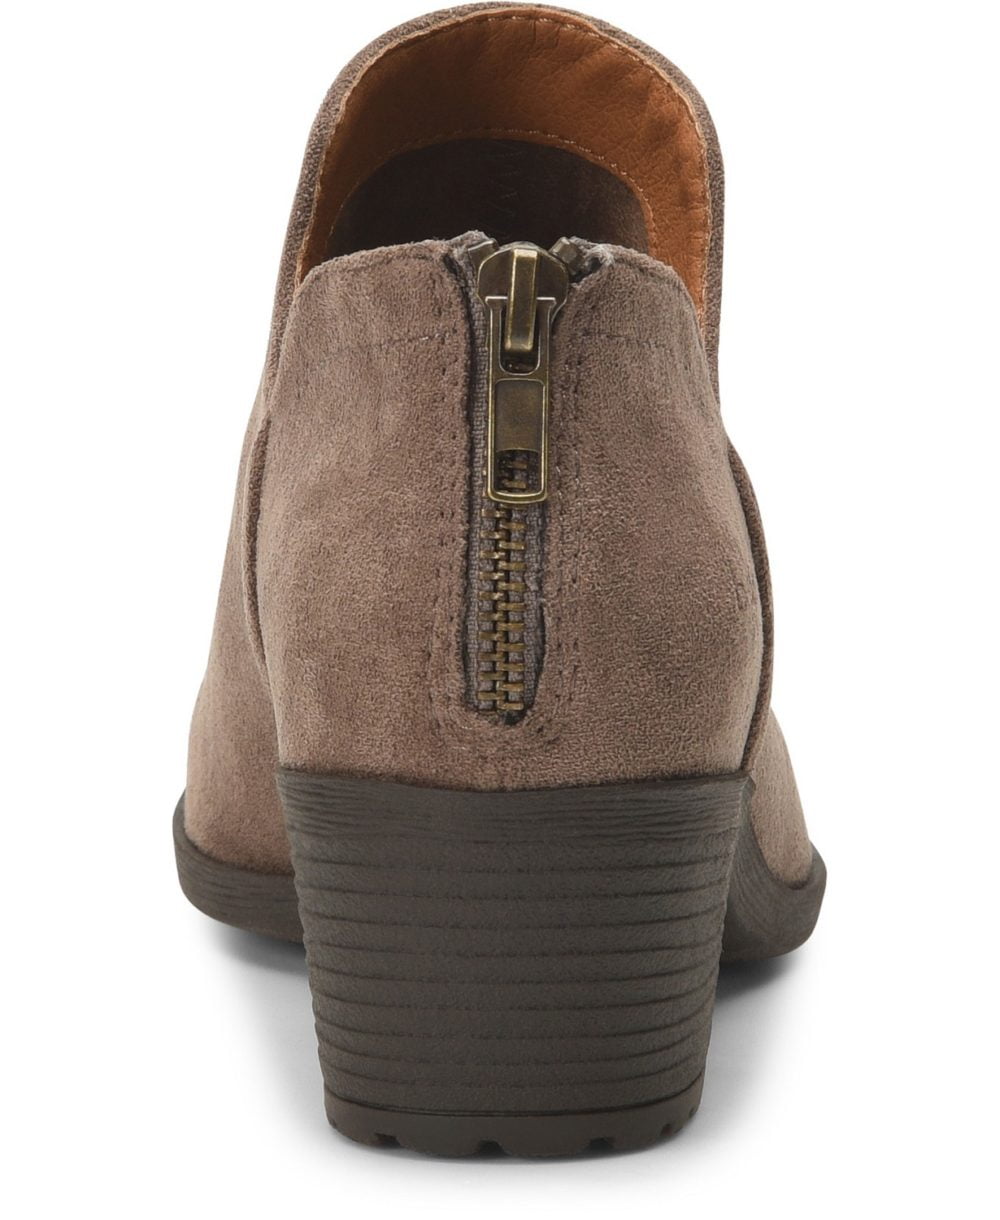 www.couturepoint.com-b-o-c-womens-taupe-celoisa-ankle-booties